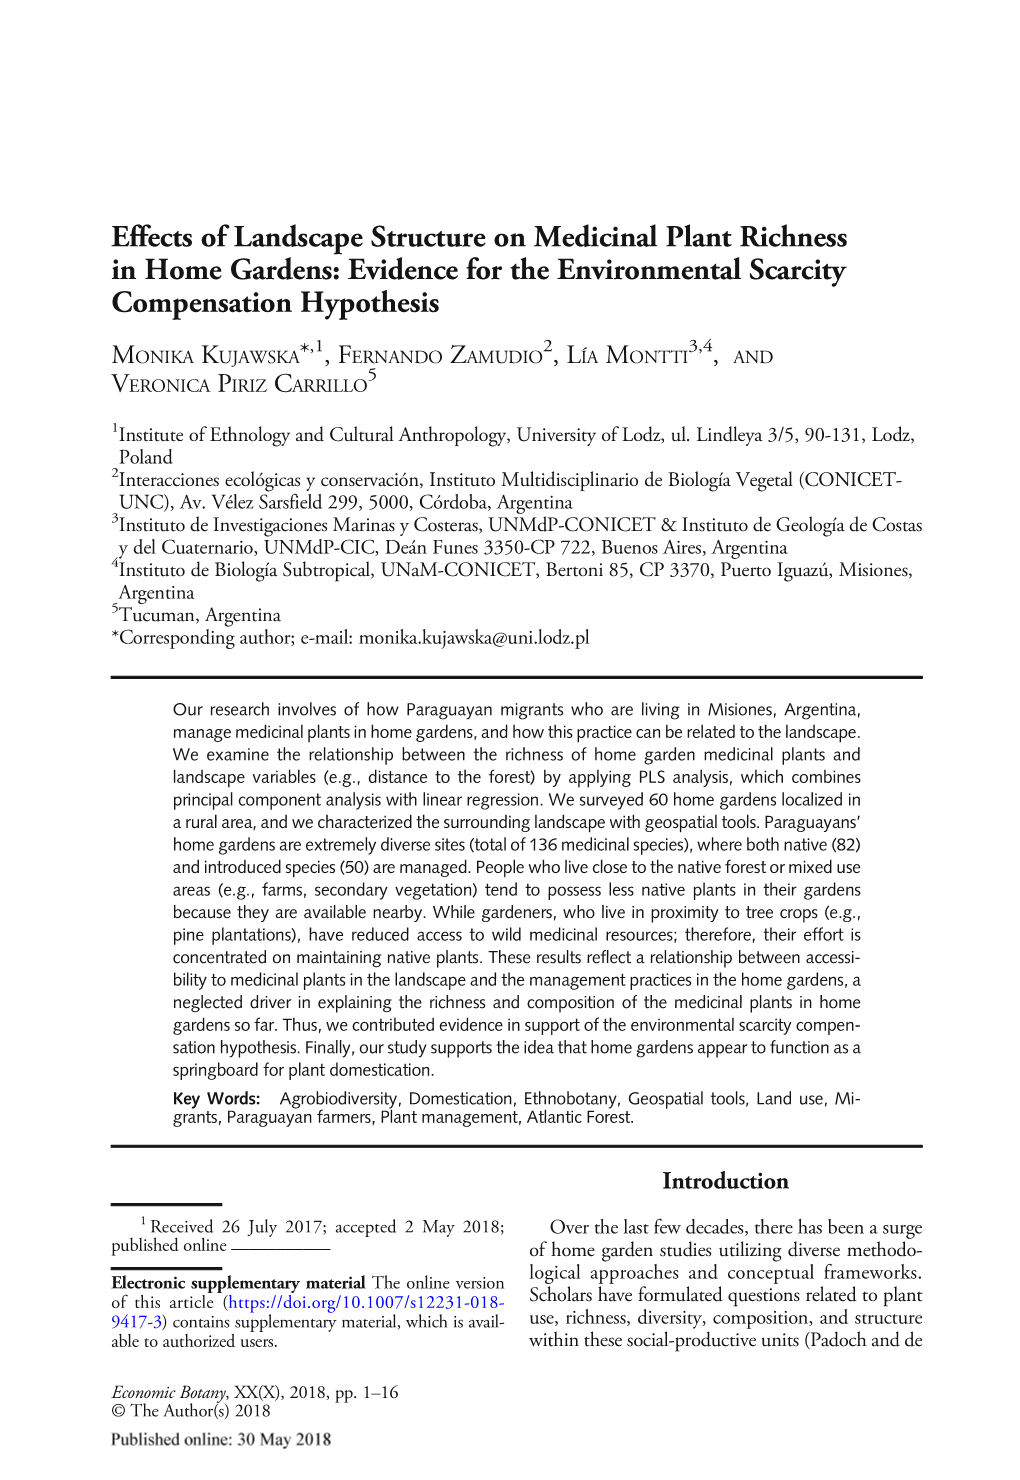 Effects of Landscape Structure on Medicinal Plant Richness in Home Gardens: Evidence for the Environmental Scarcity Compensation Hypothesis